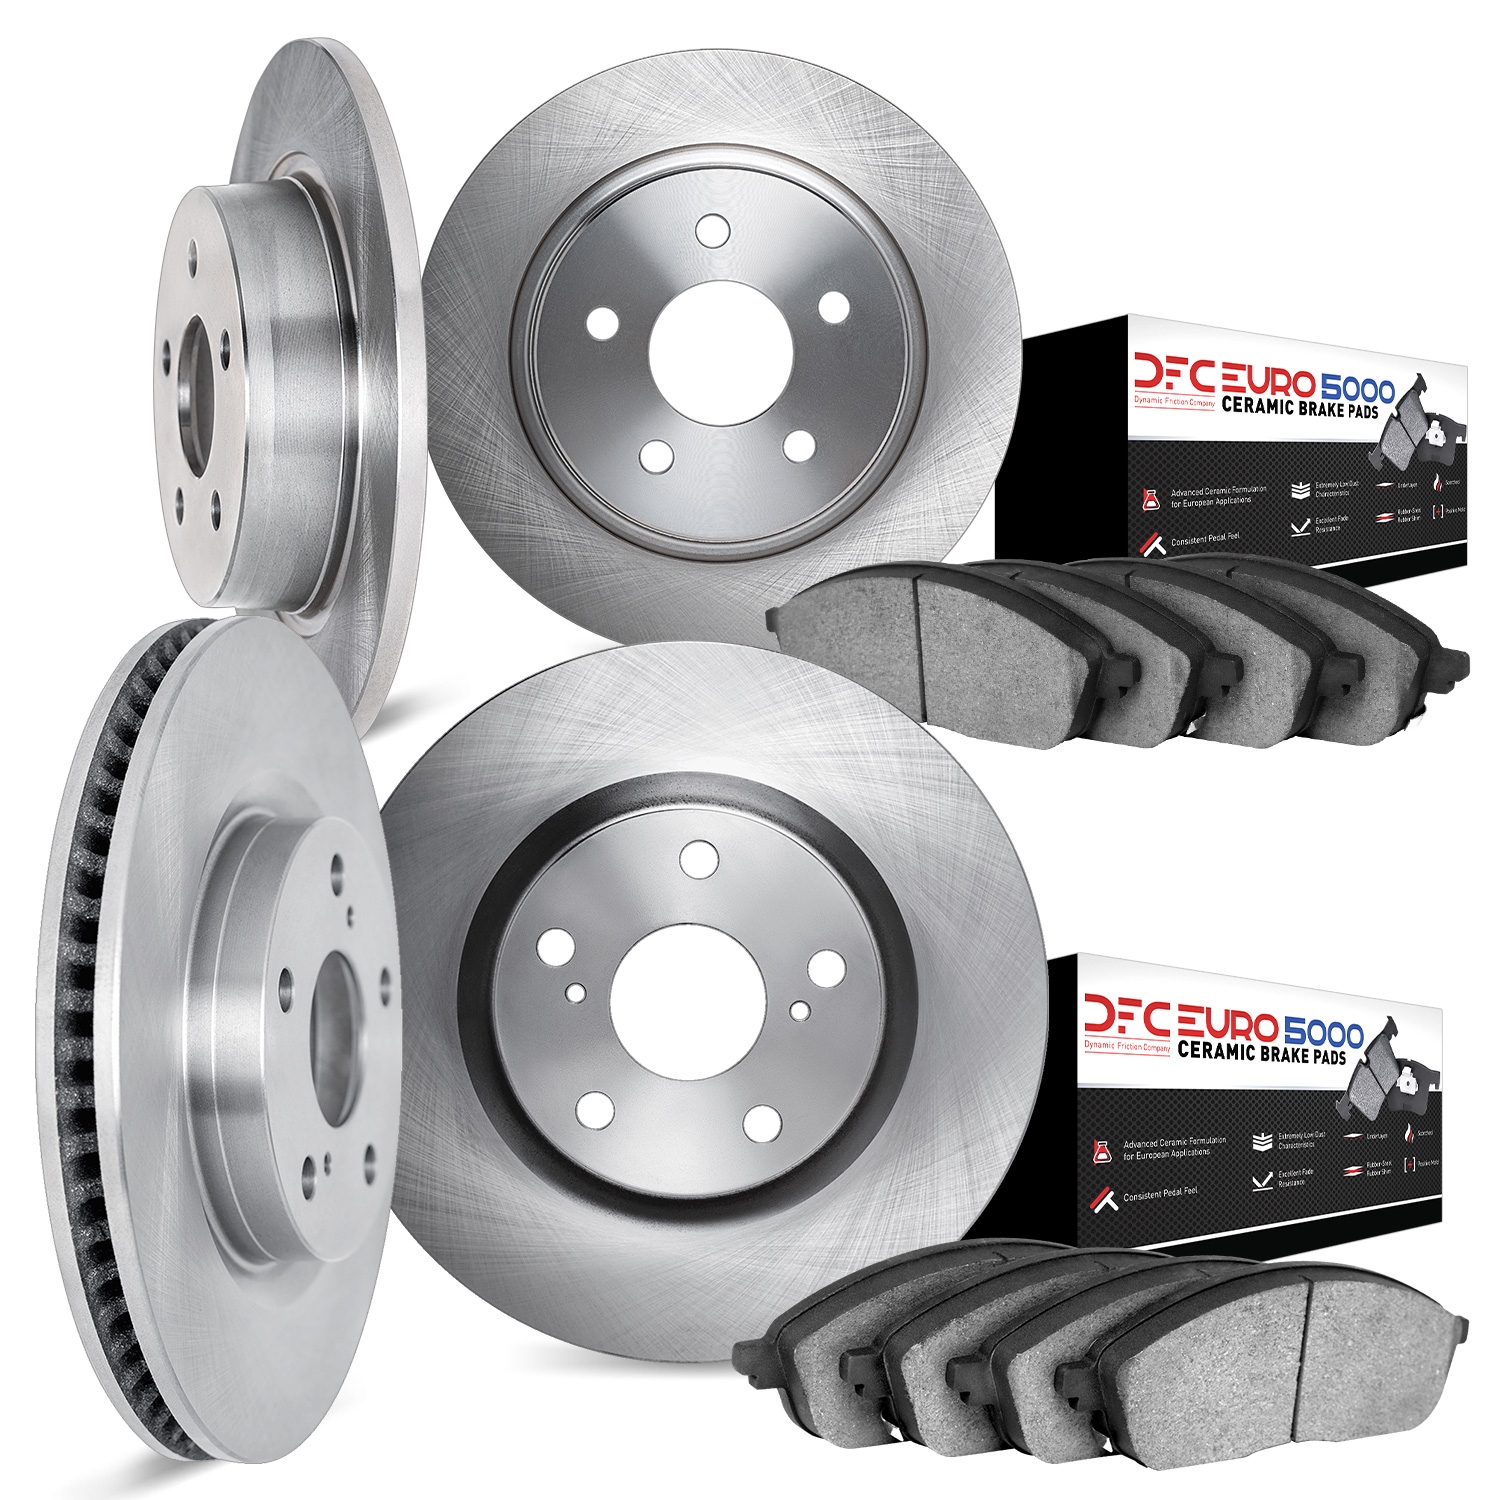 6604-63027 Brake Rotors w/5000 Euro Ceramic Brake Pads, 2008-2015 Mercedes-Benz, Position: Front and Rear